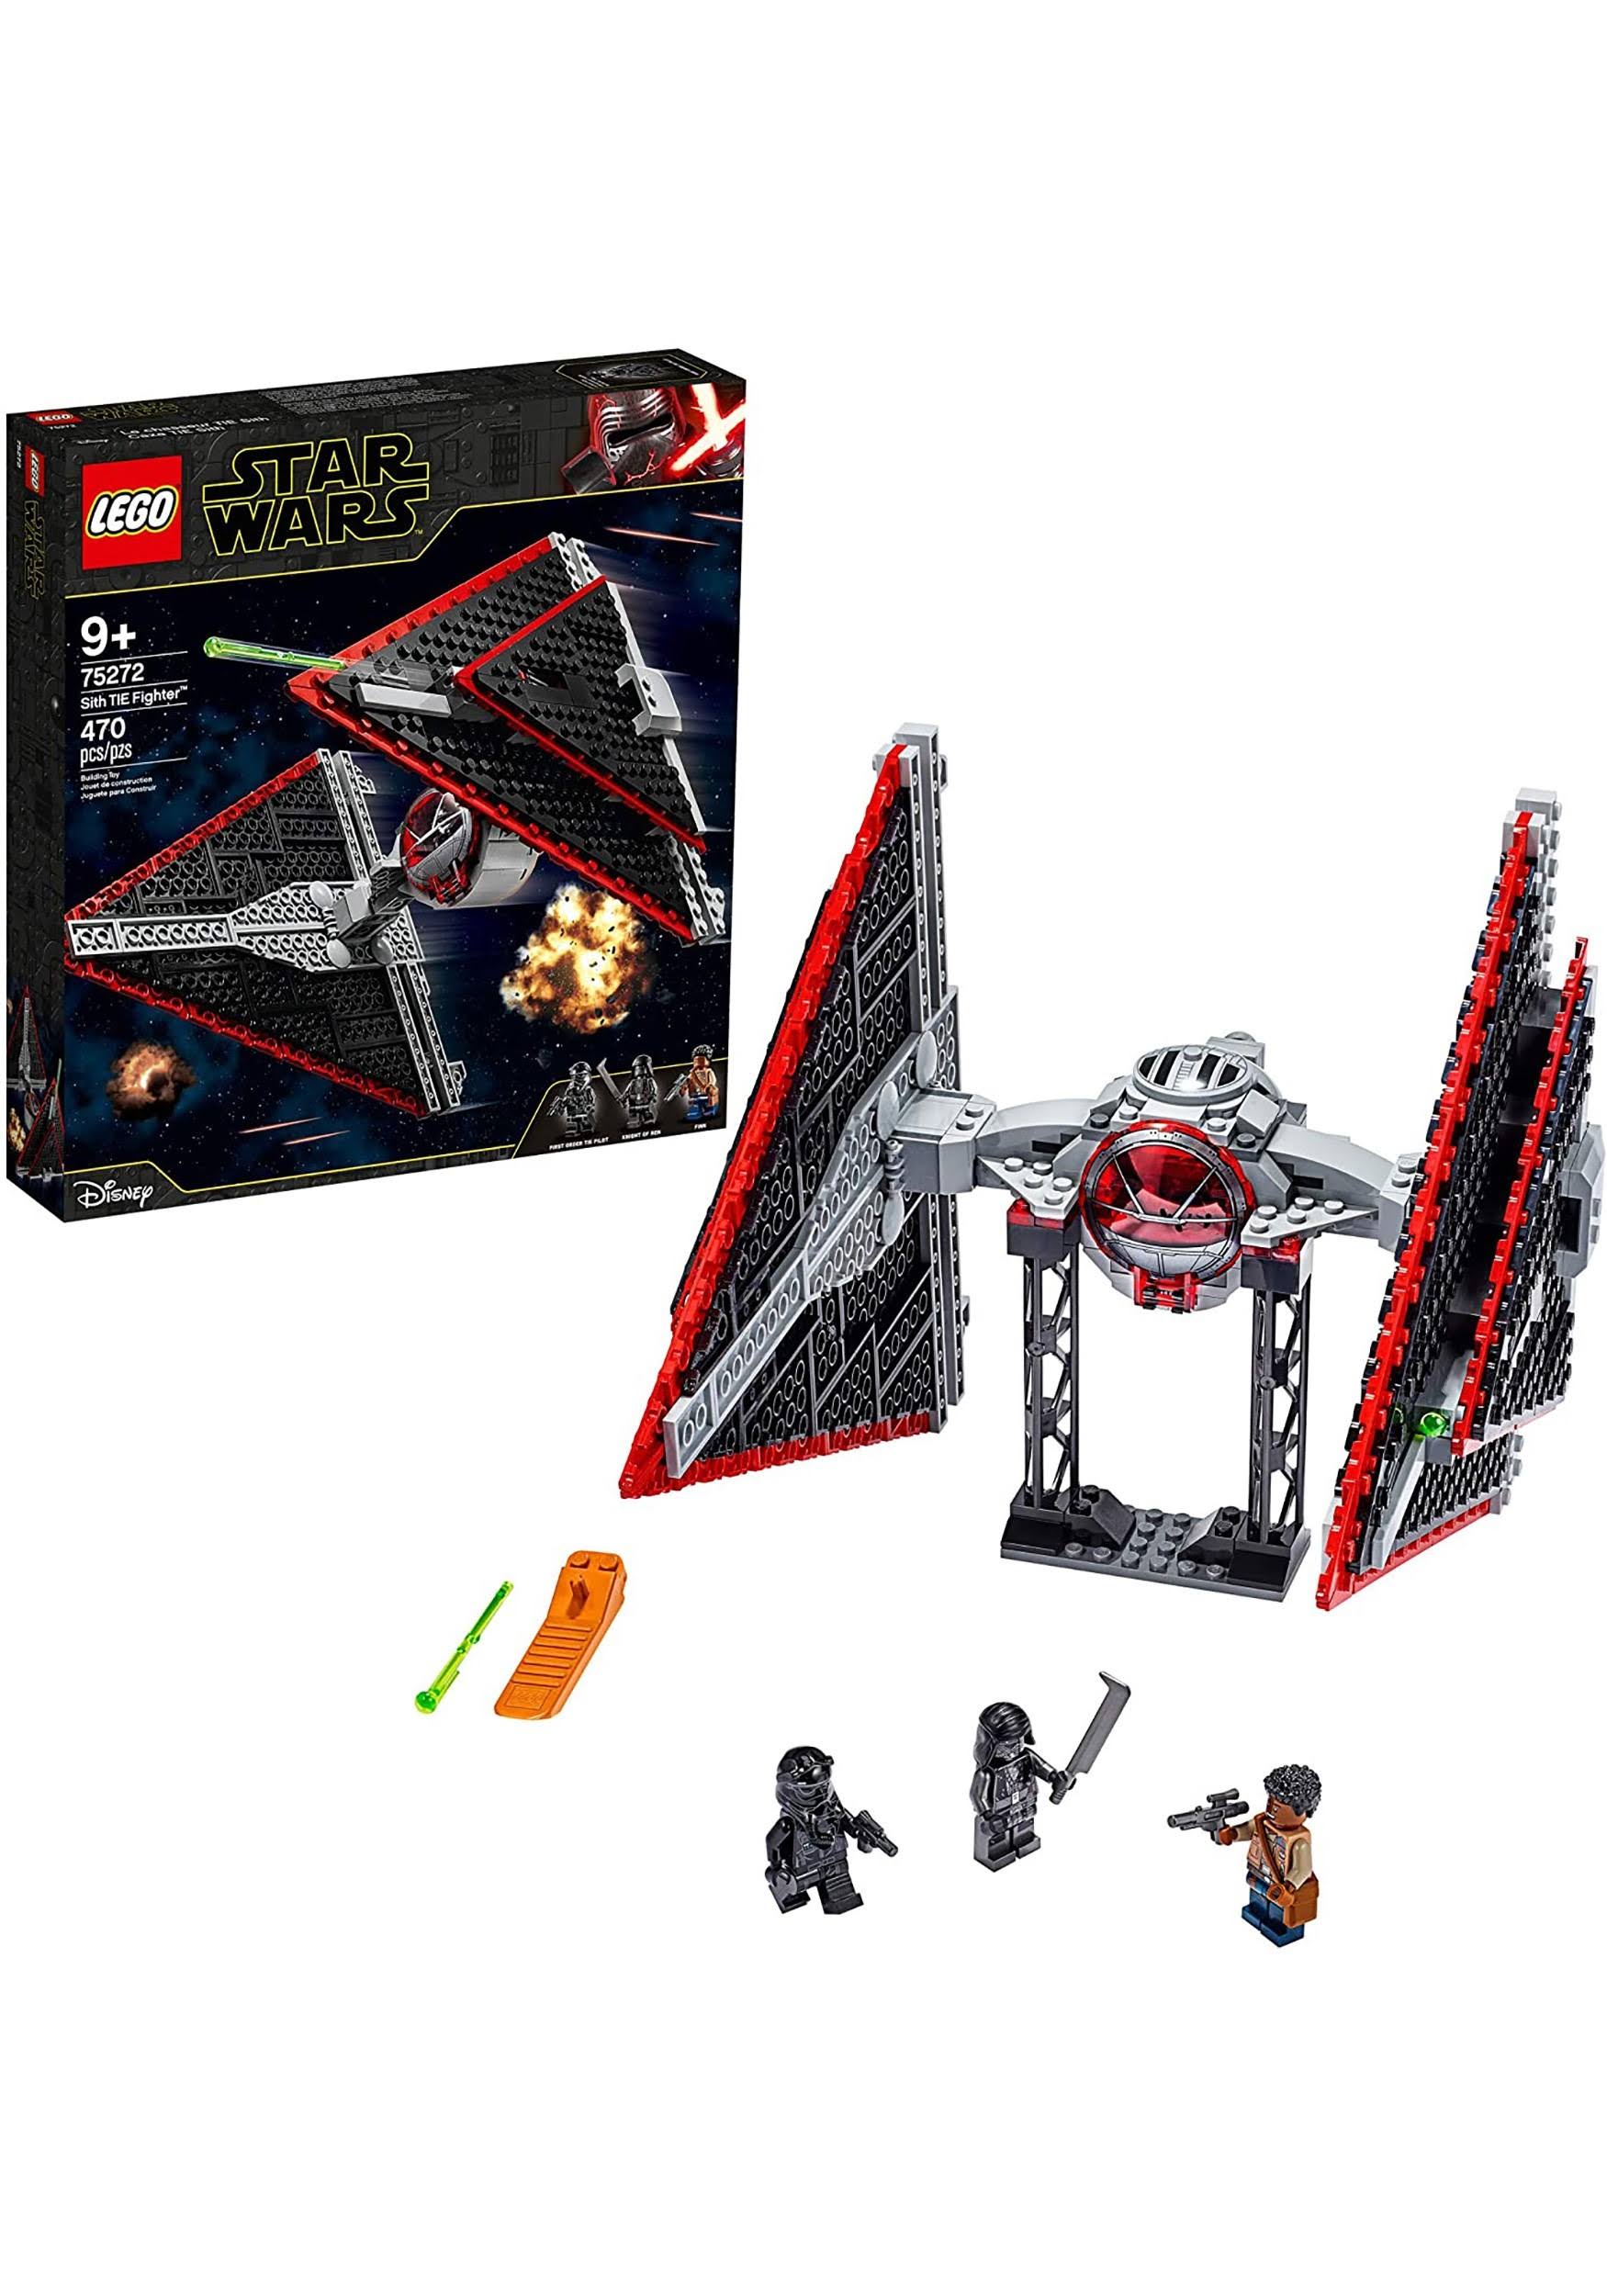 LEGO Star Wars Sith TIE Fighter 75272 Collectible Building Kit, Cool C